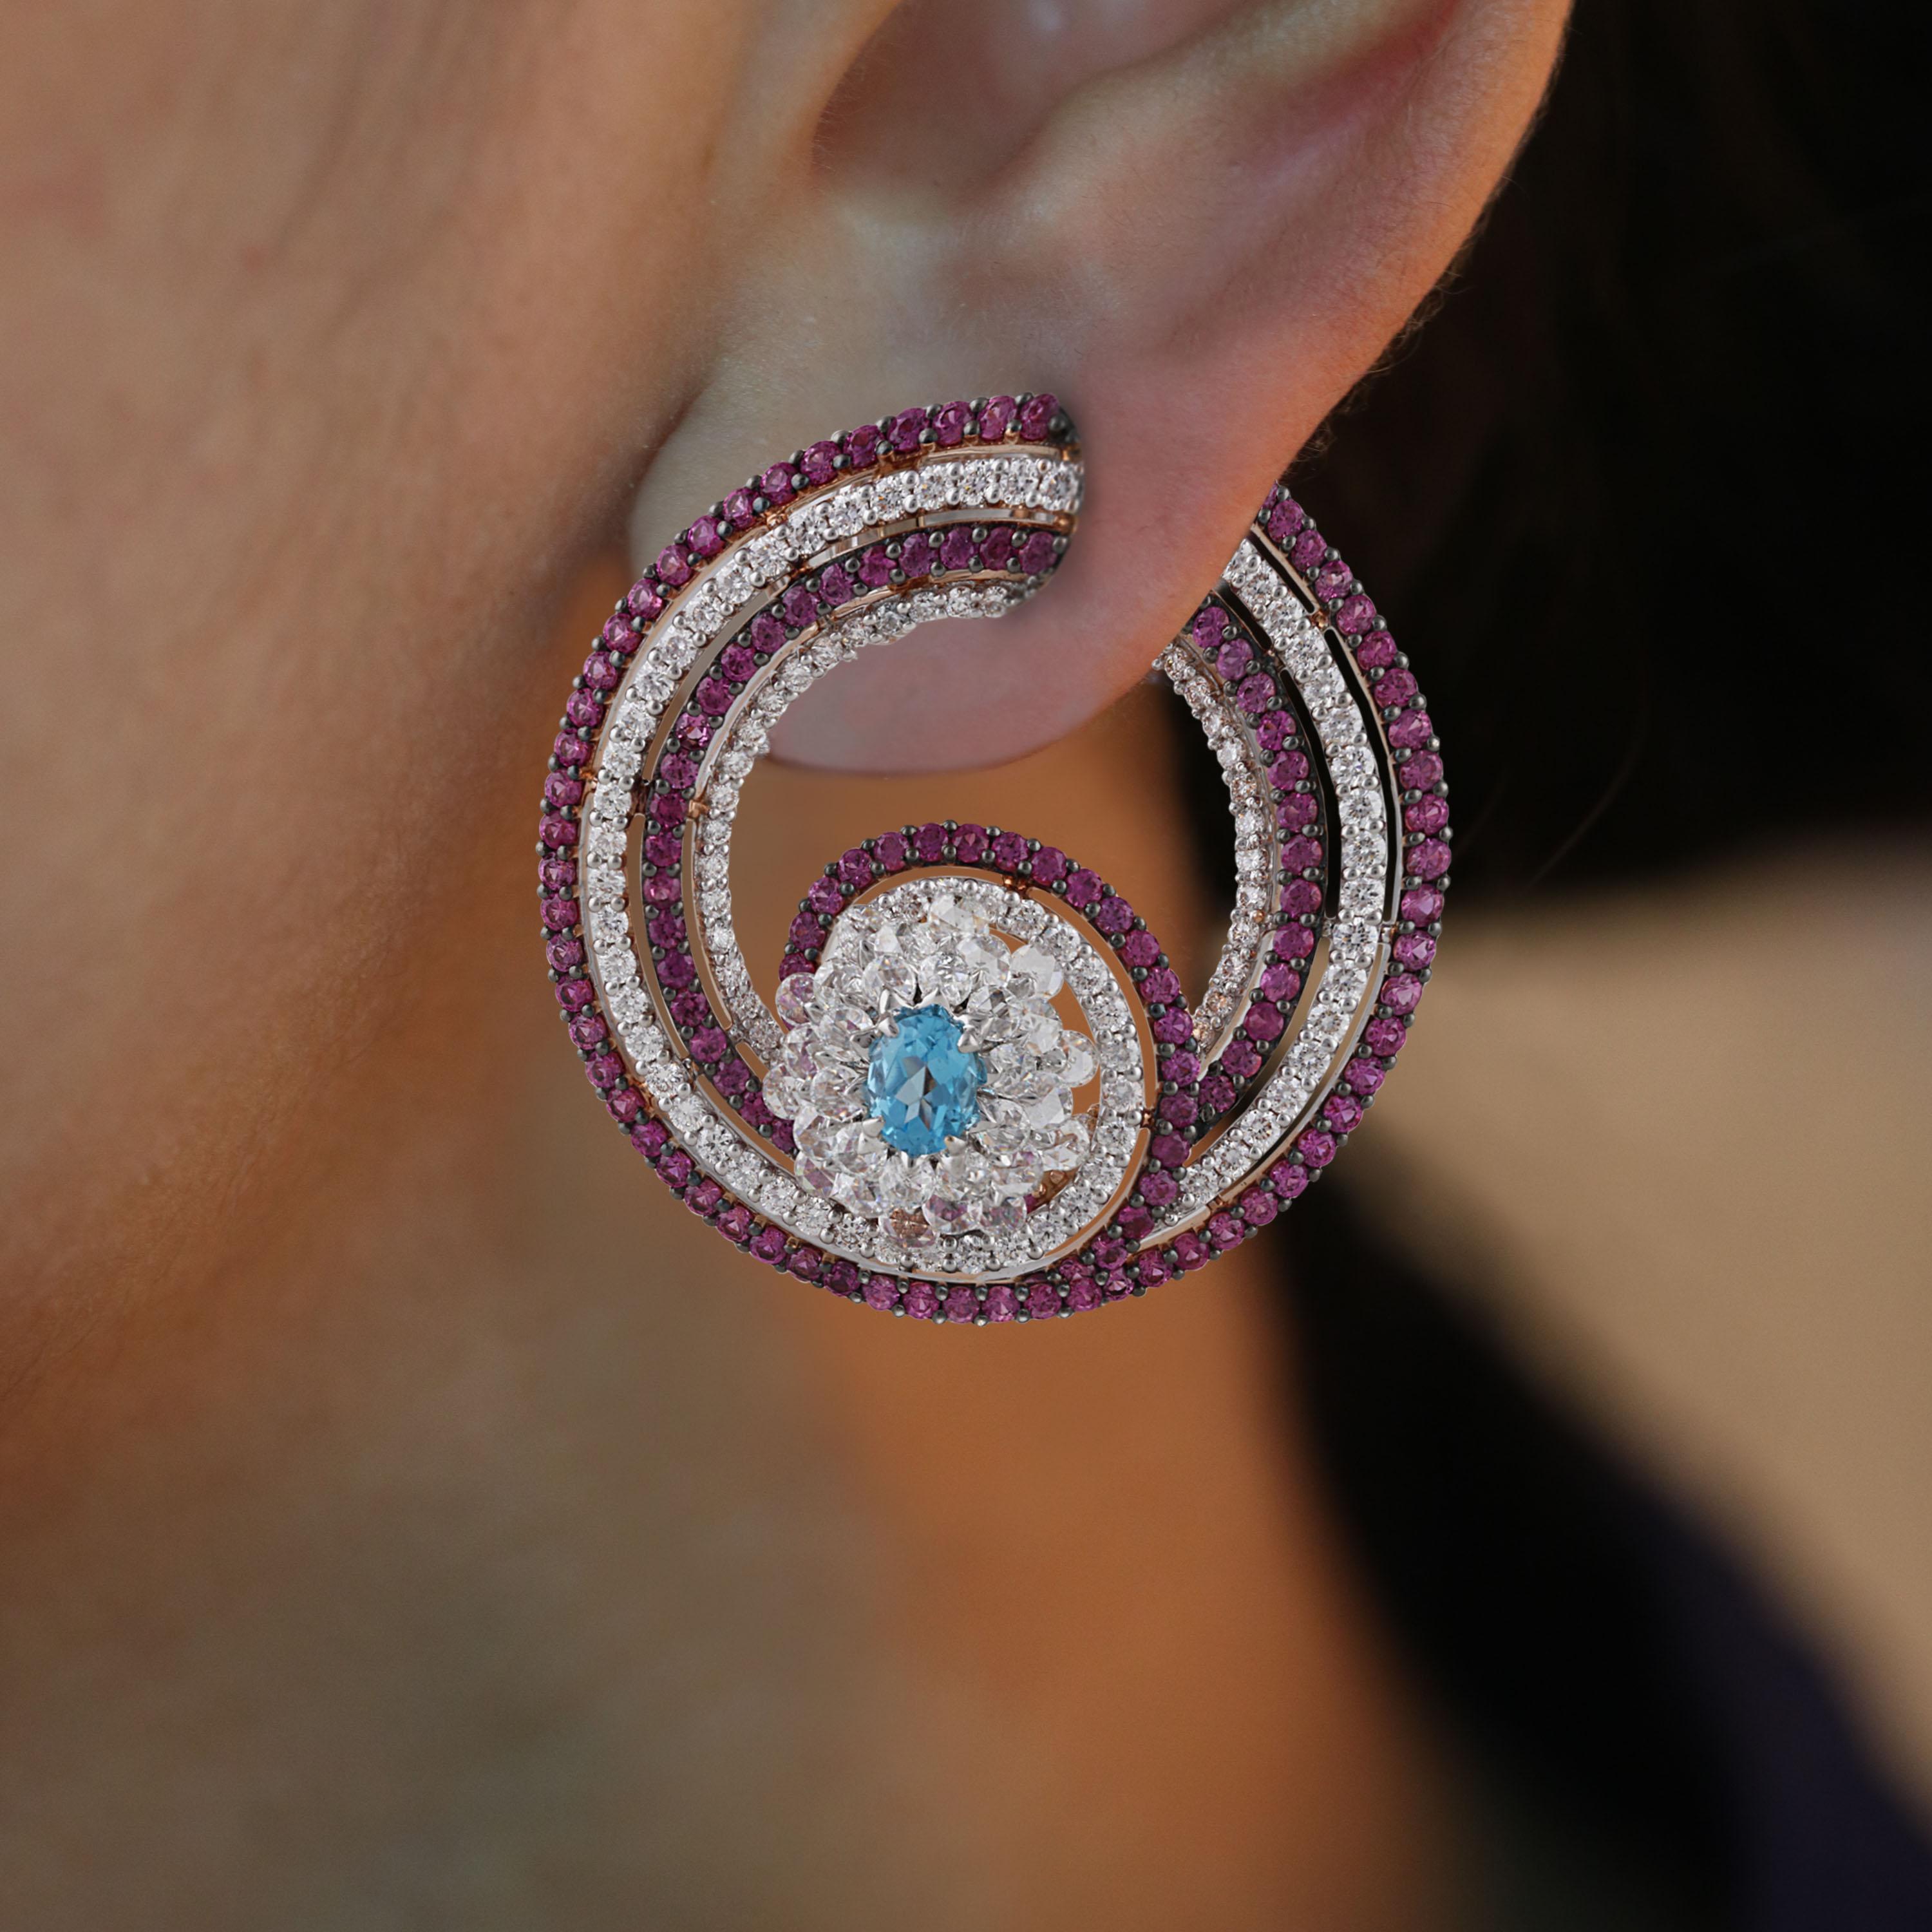 Gross Weight: 24.84 Grams
Diamond Weight: 3.63 cts
Pink Sapphire Weight: 3.95 cts
Blue Topaz Weight: 0.83 cts
IGI Certification can be done on Request.

Video of the product can be shared on request.

These hoop earrings mimic the delicacy and